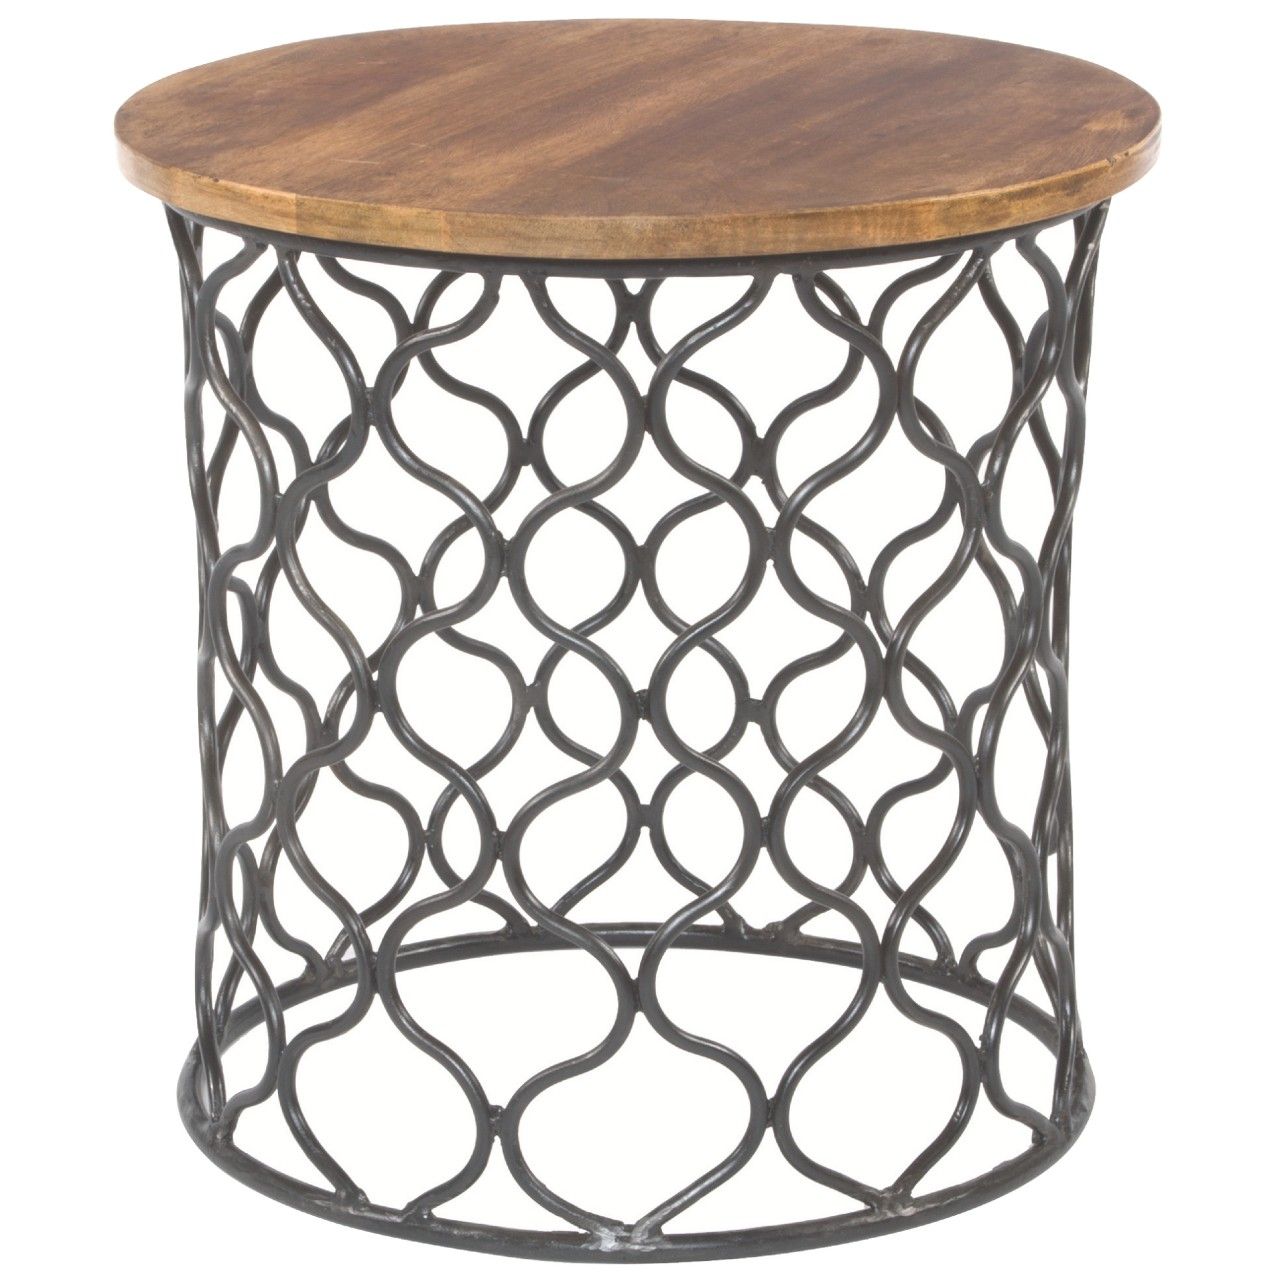 cage accent table toms home furnishings wish list for clarissa metal tiny skinny glass tiffany stained lamp sage coffee brass ship lights windham door cabinet gray styling white